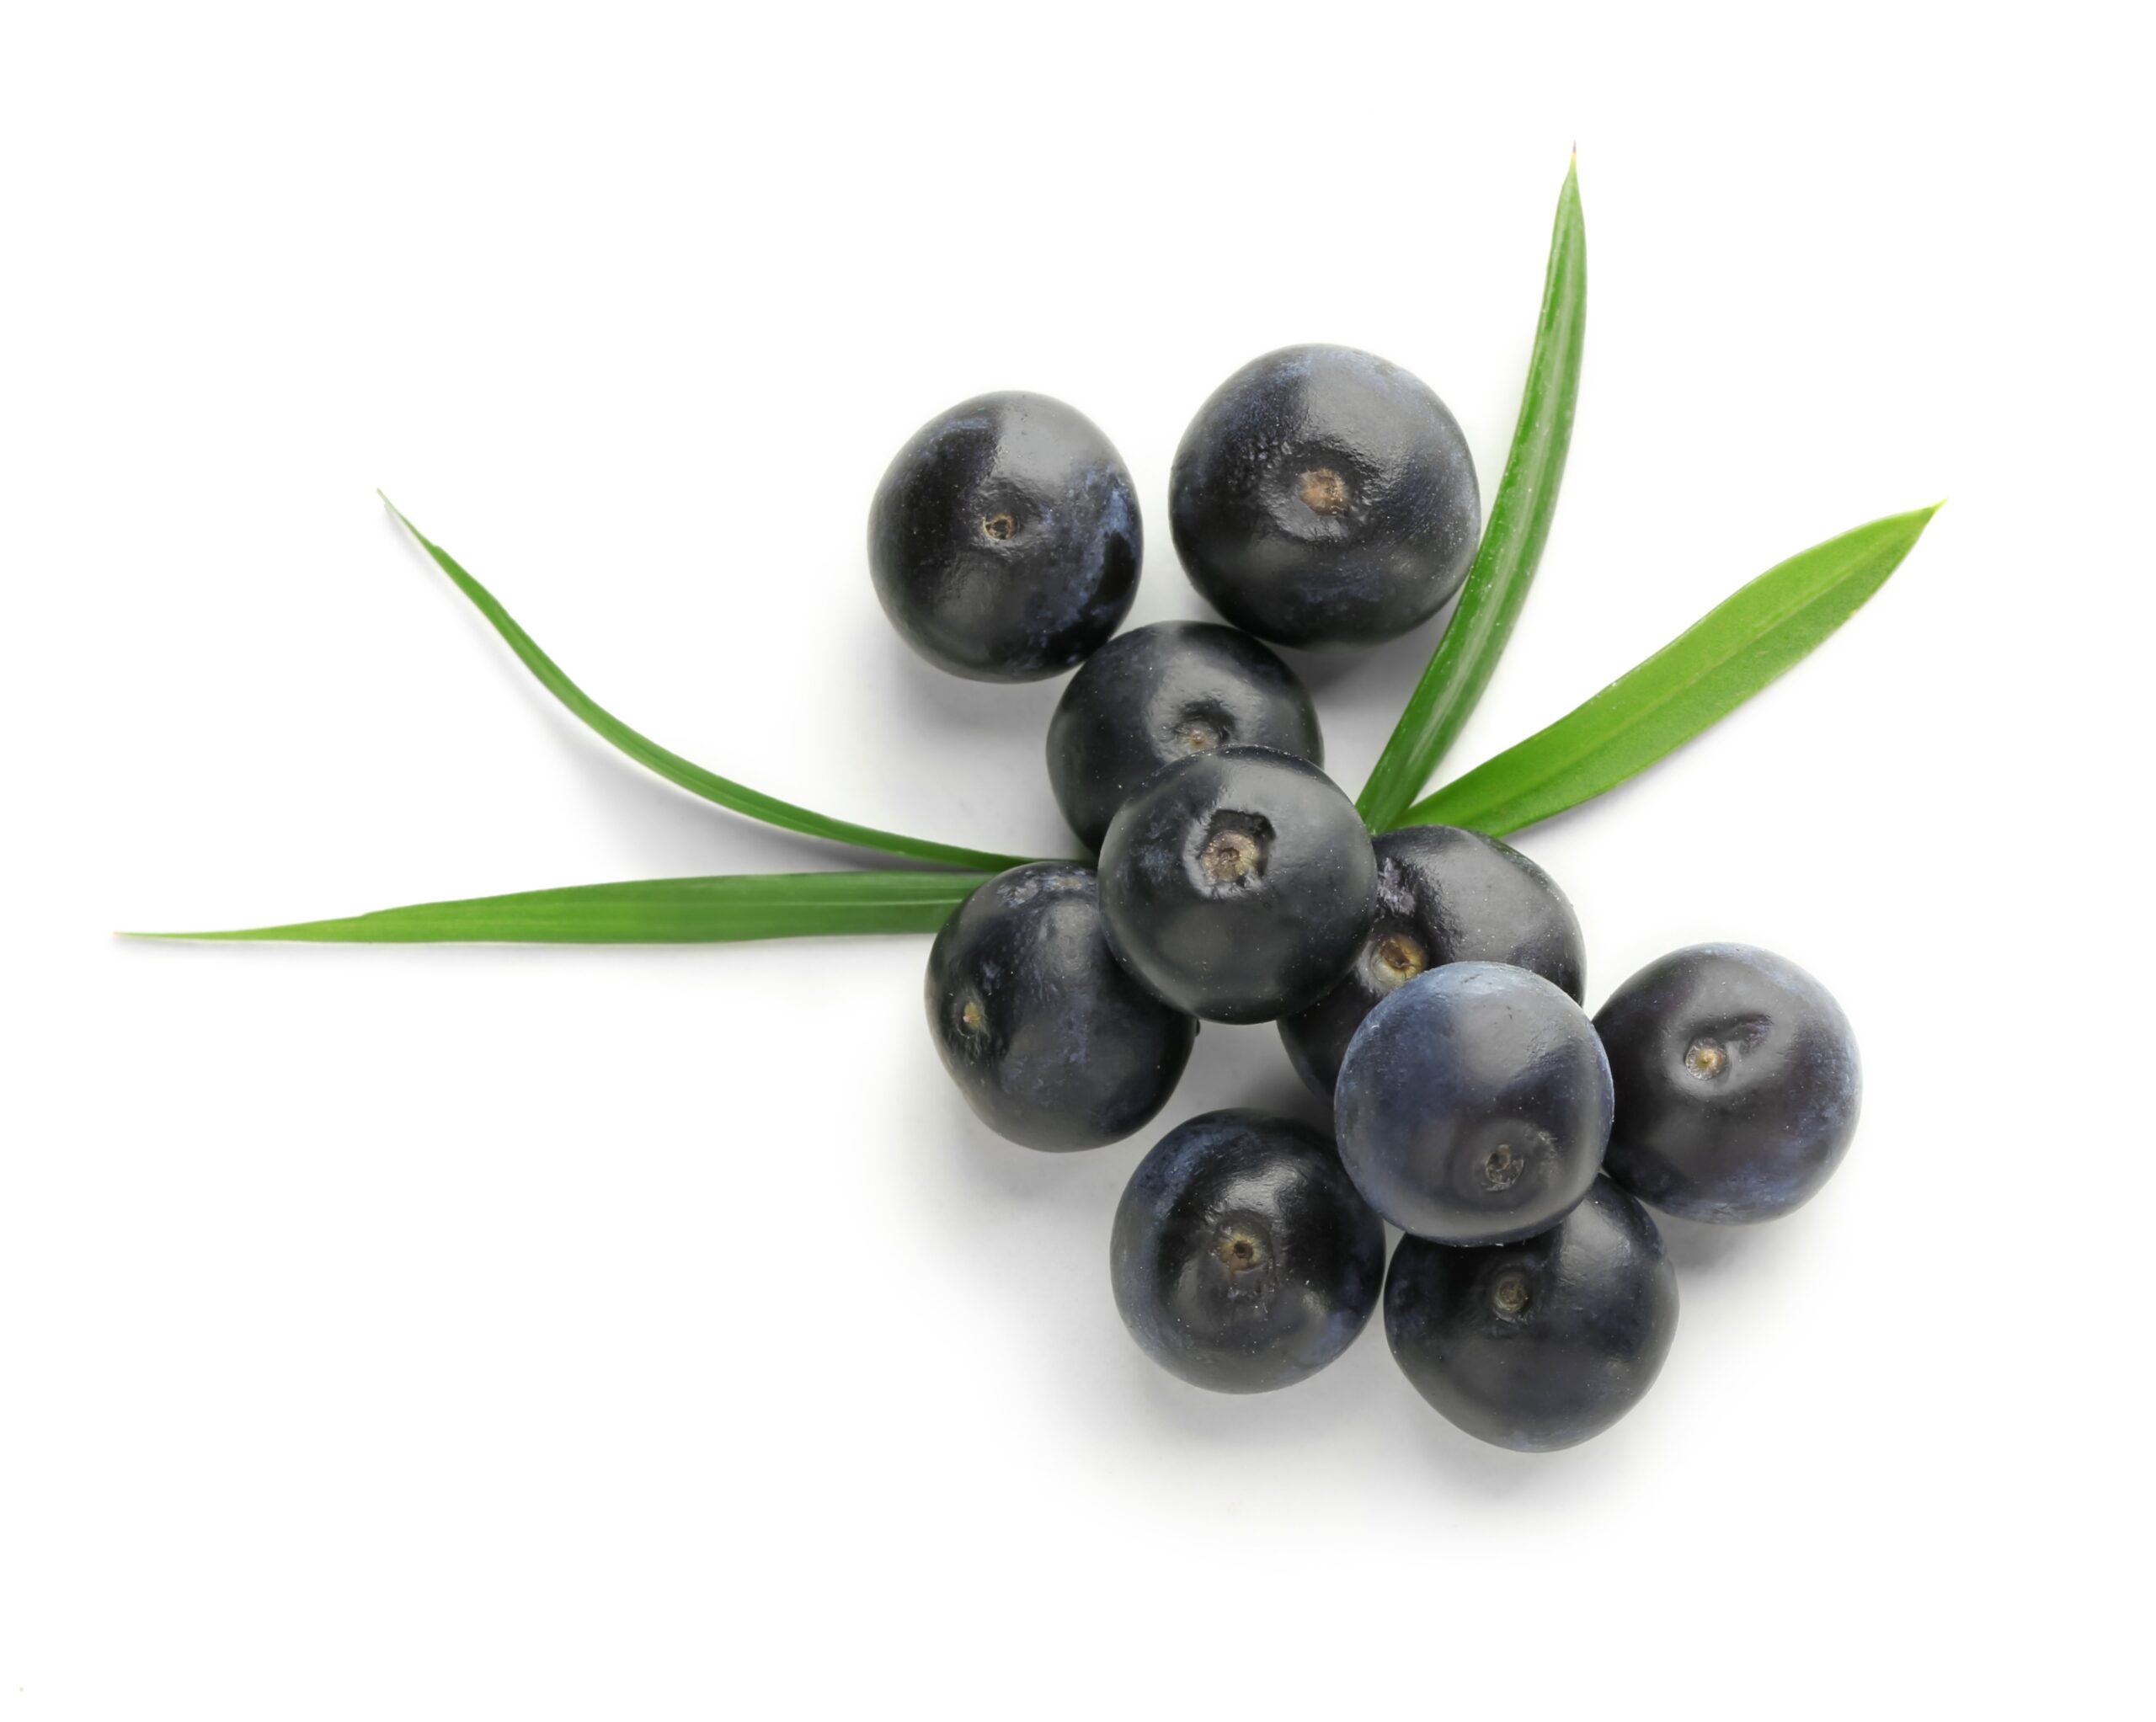 What are the benefits of acai berries